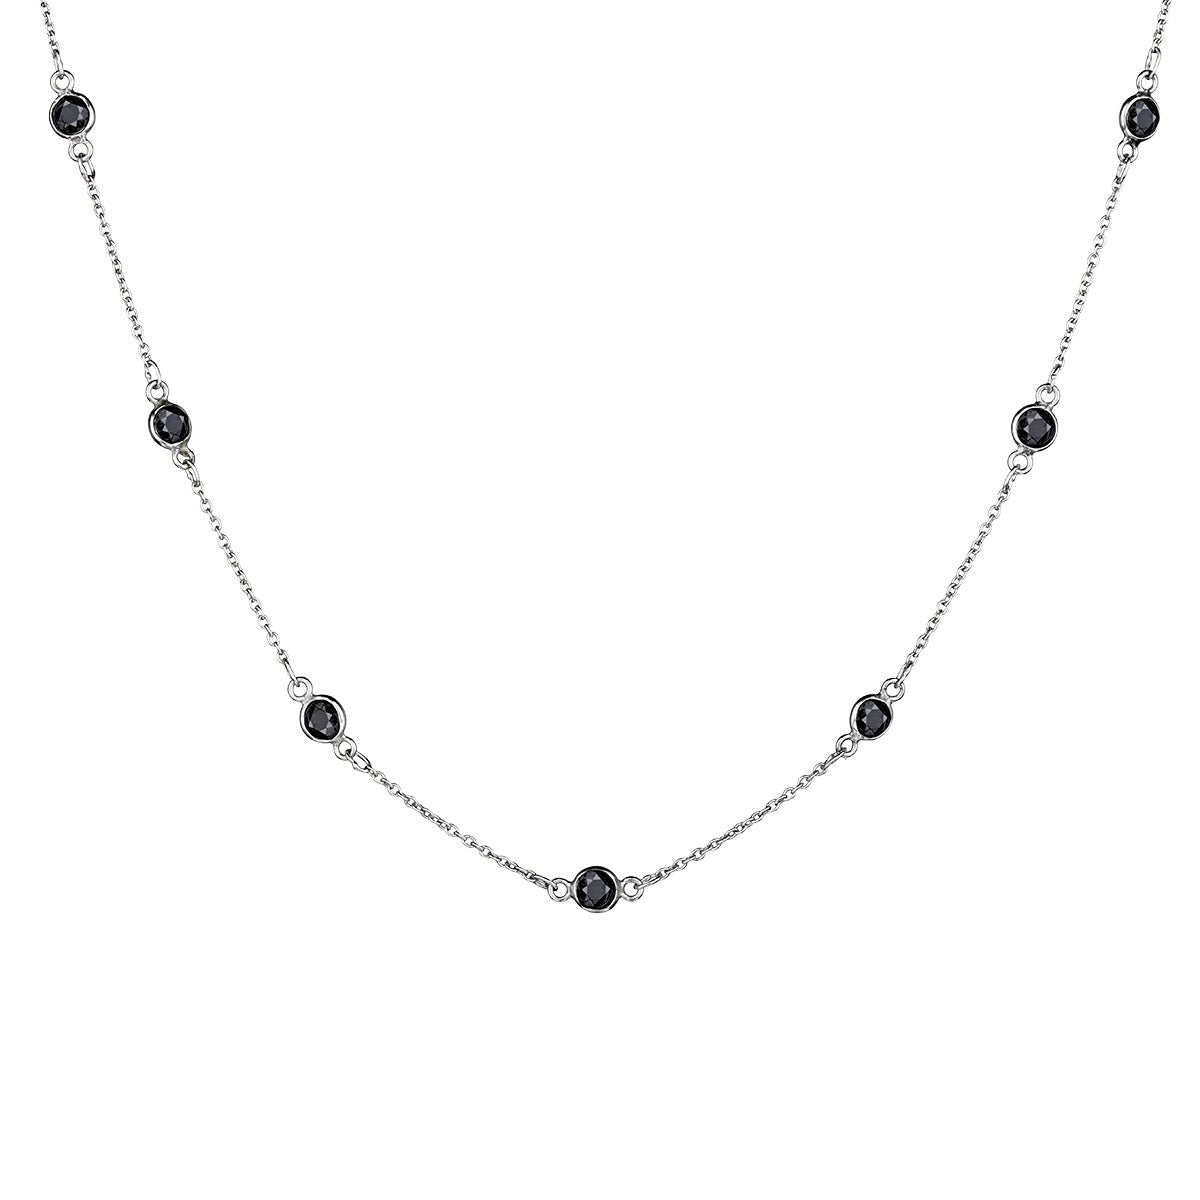 Genuine Black Sapphire Necklace,  Sterling Silver. Necklaces and Pendants. Griffin Jewellery Designs. 